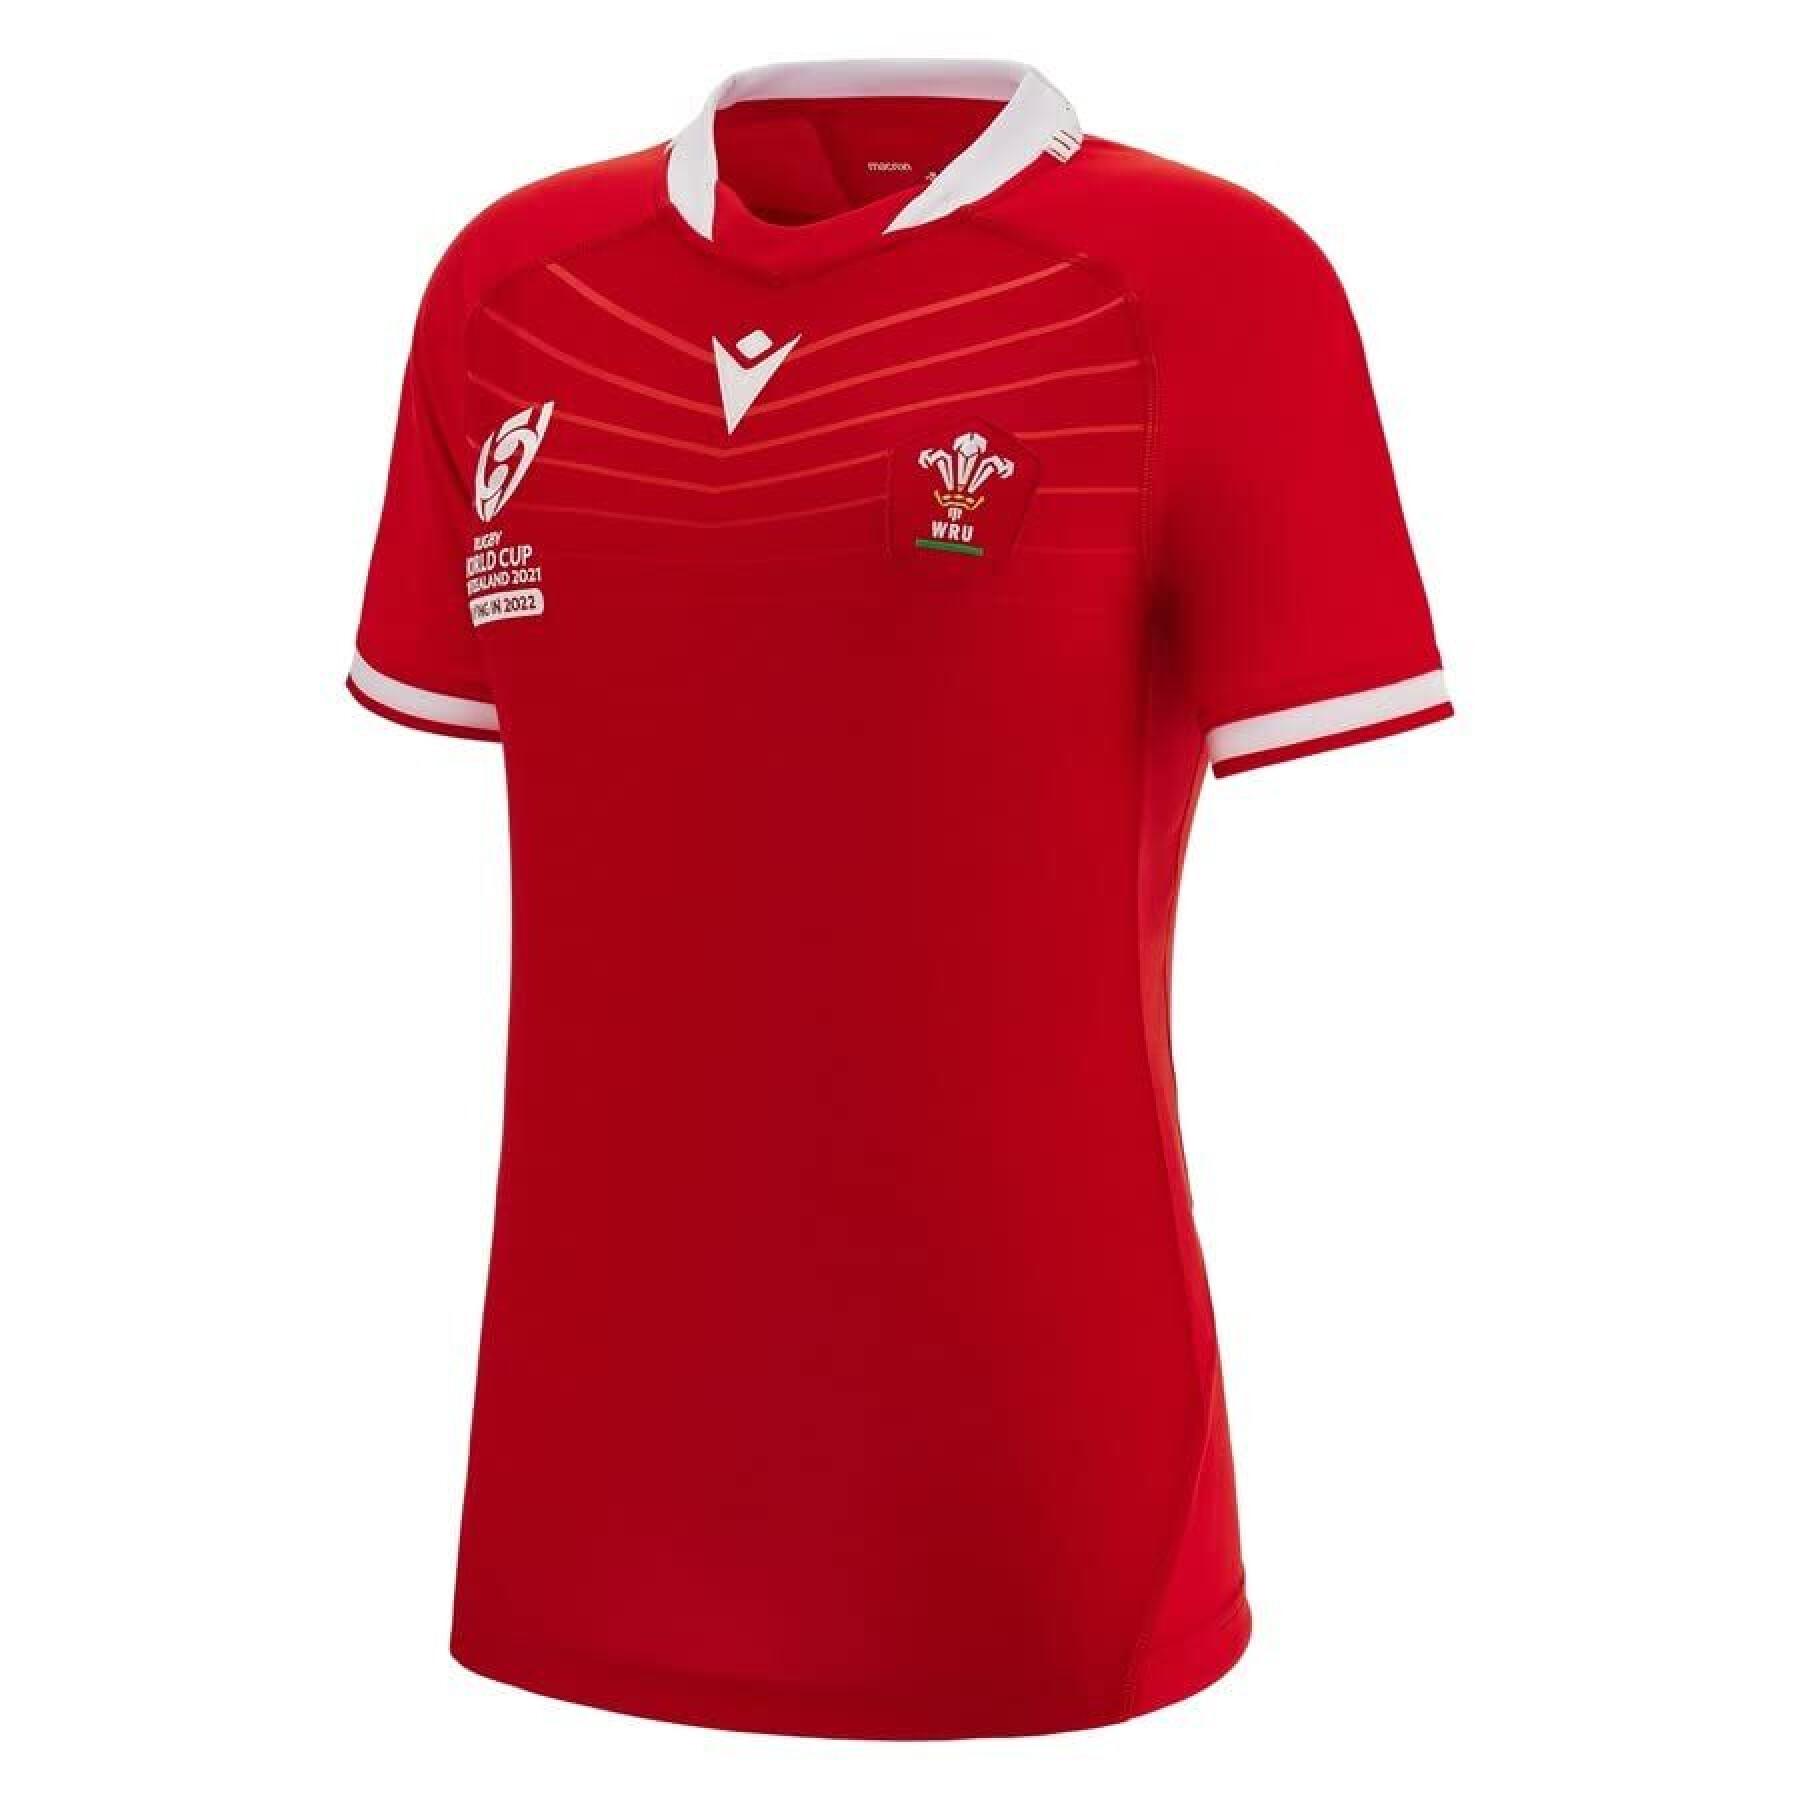 Women's home jersey Pays de Galles Rugby XV WRWC 2023